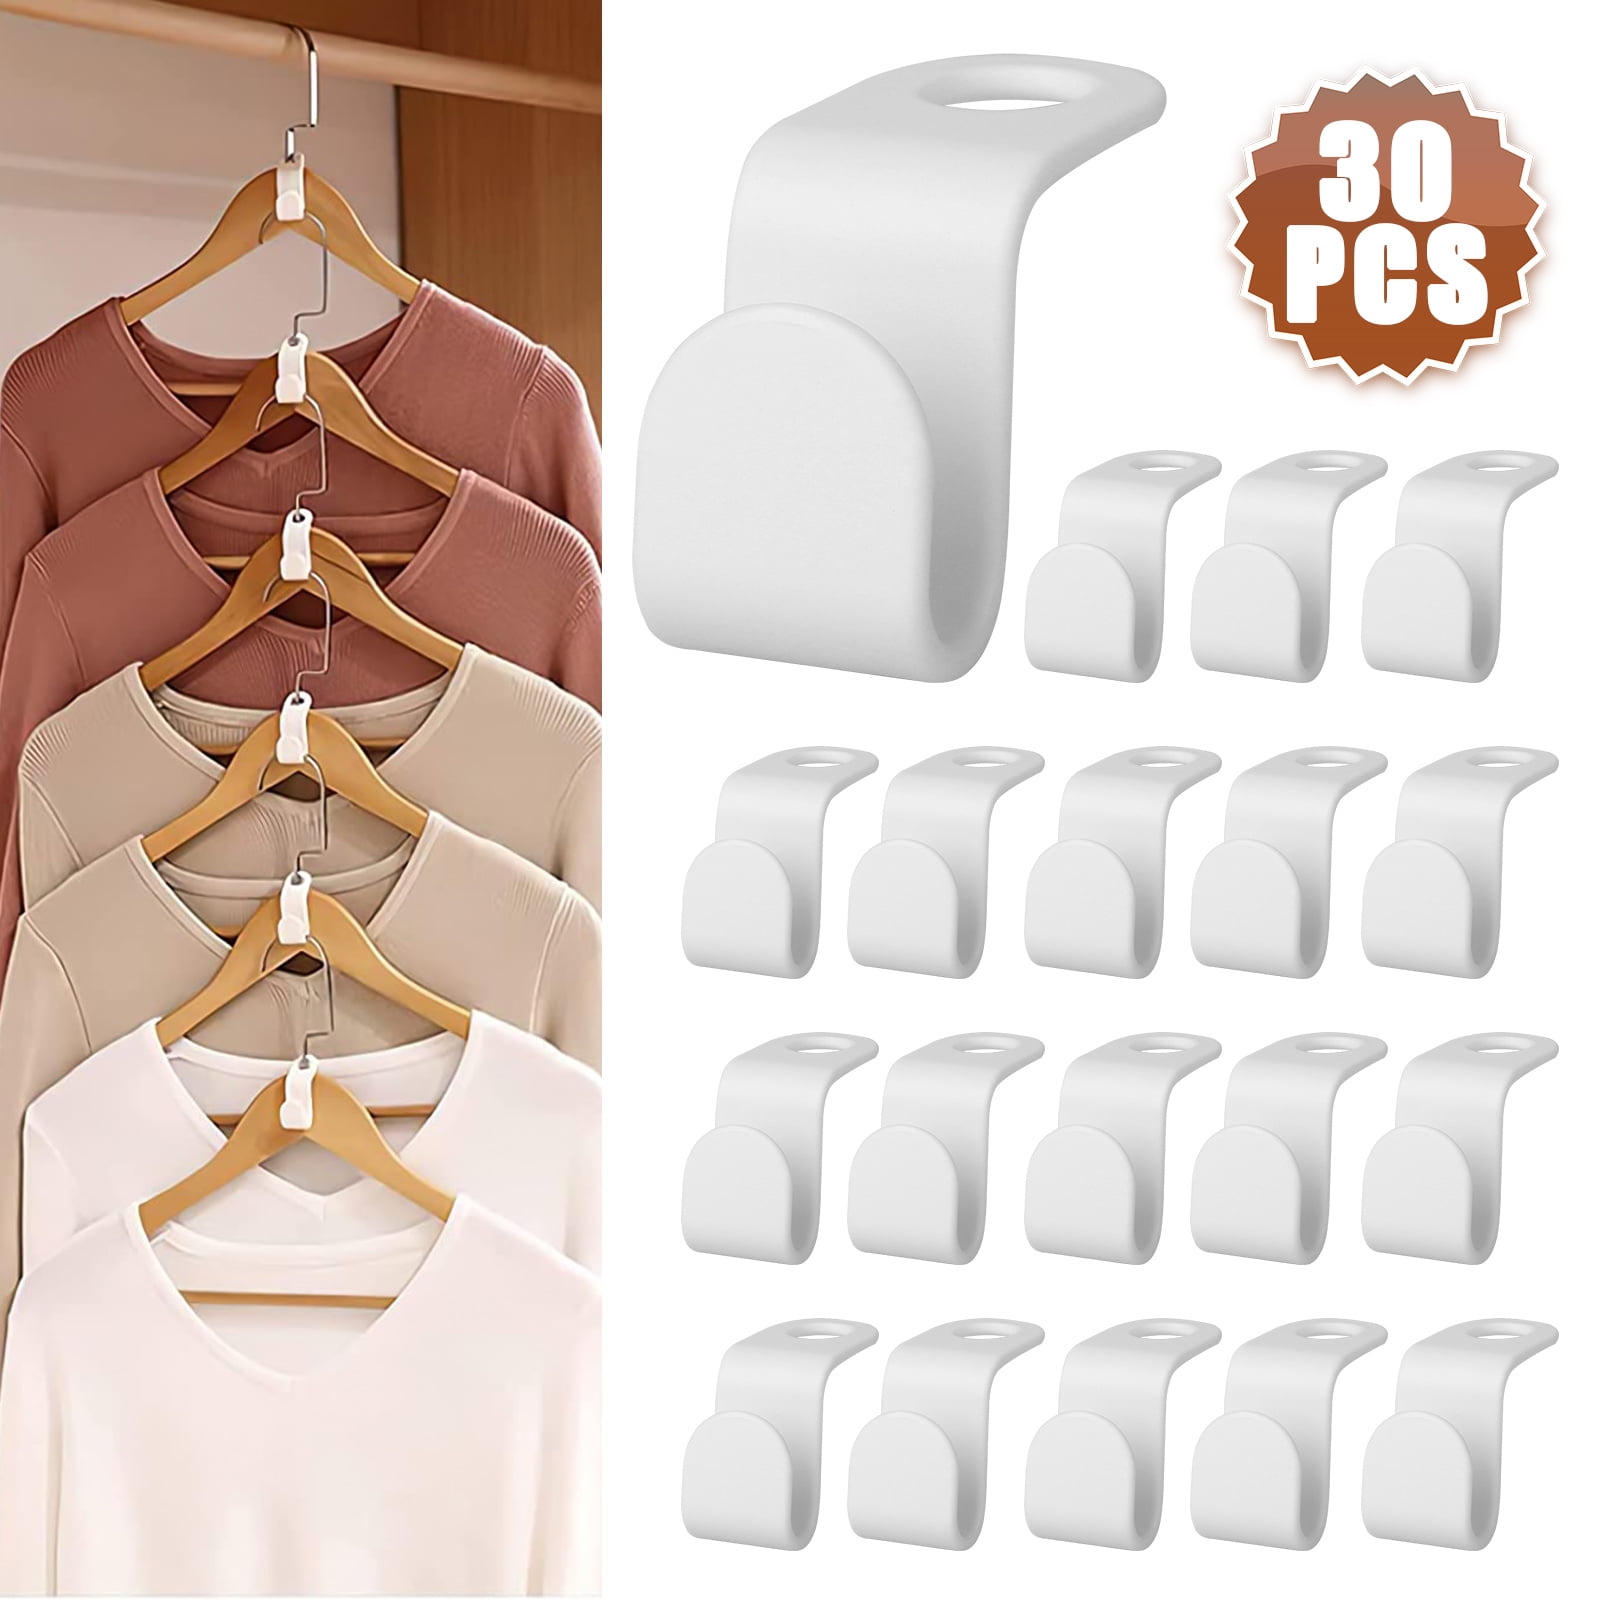 10/30pcs Clothes Hanger Connector Hooks Hanger Extender Clips Cascading Hanger  Hooks for Wardrobe Space Saver and Organizer Closets Only د.ب.‏ 0.40 بات  بات Mobile